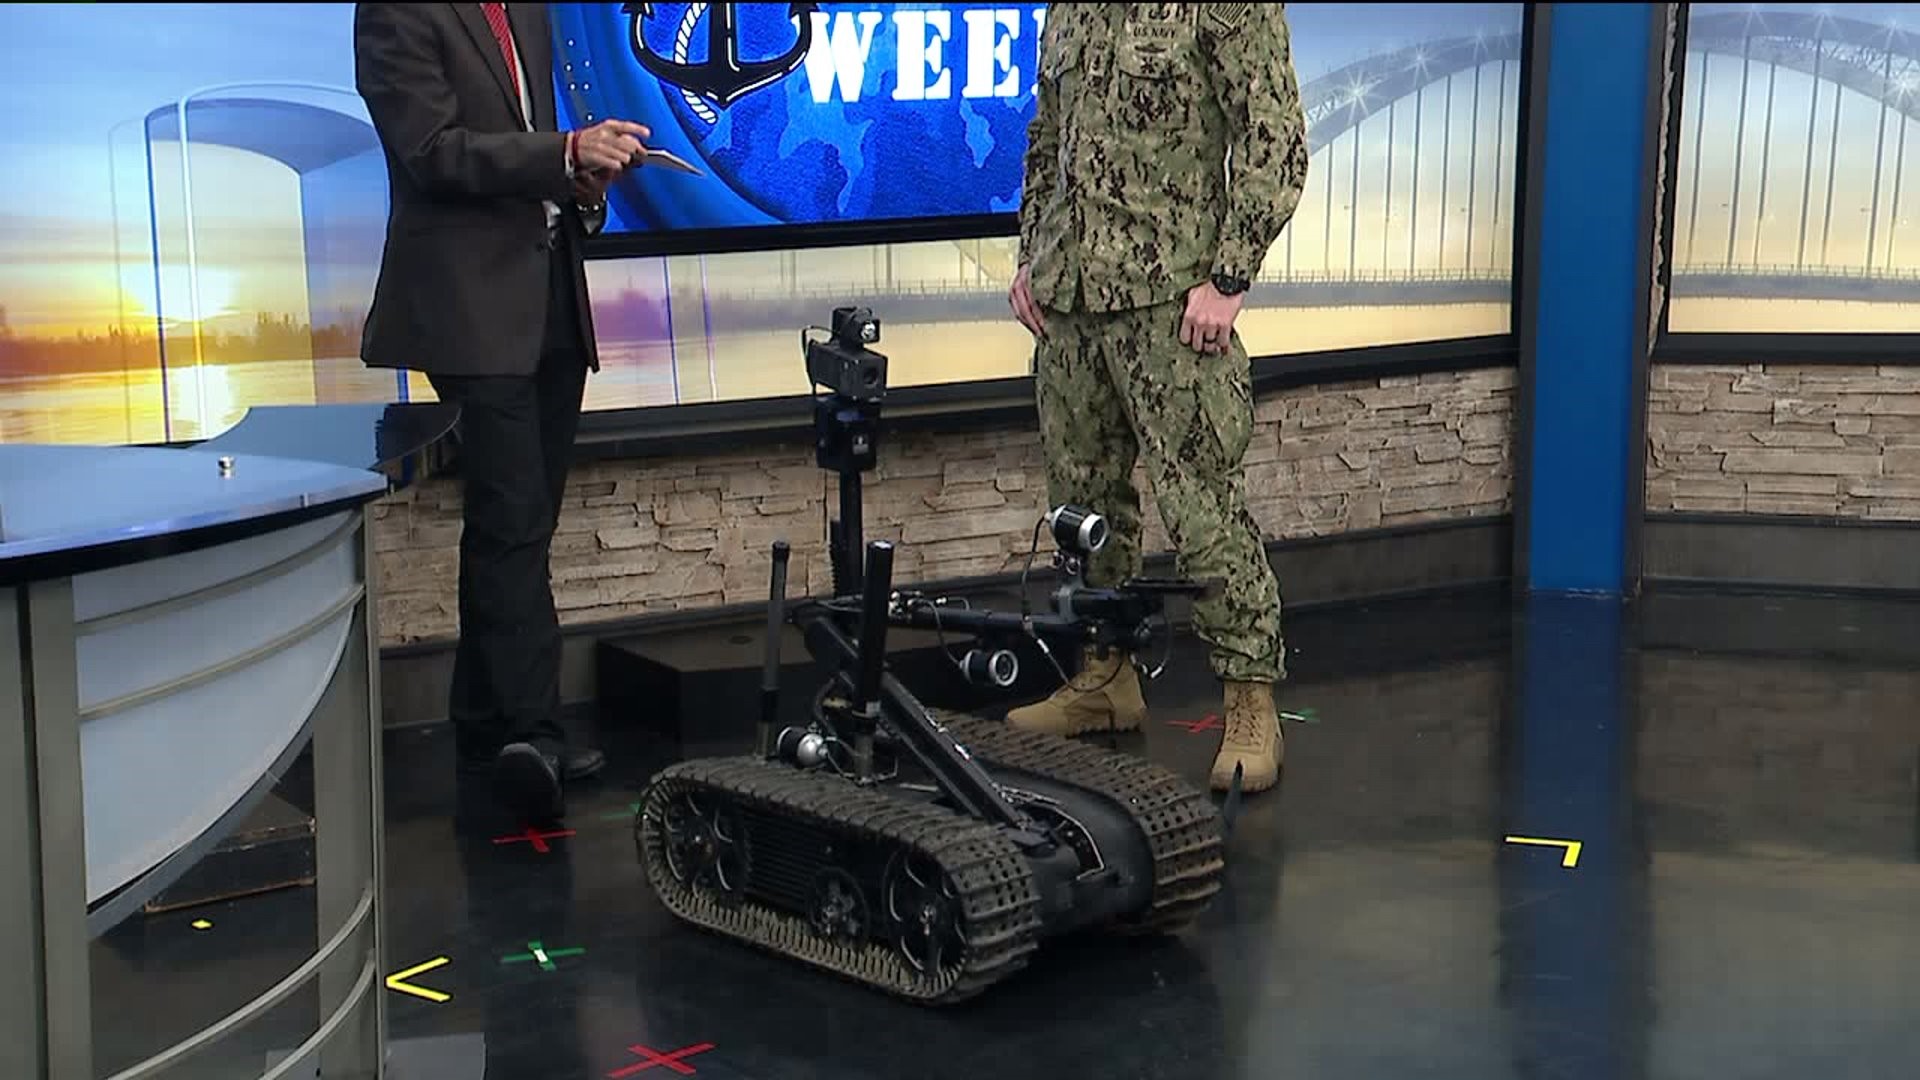 Ever seen a bomb diffusing robot? Watch this video here